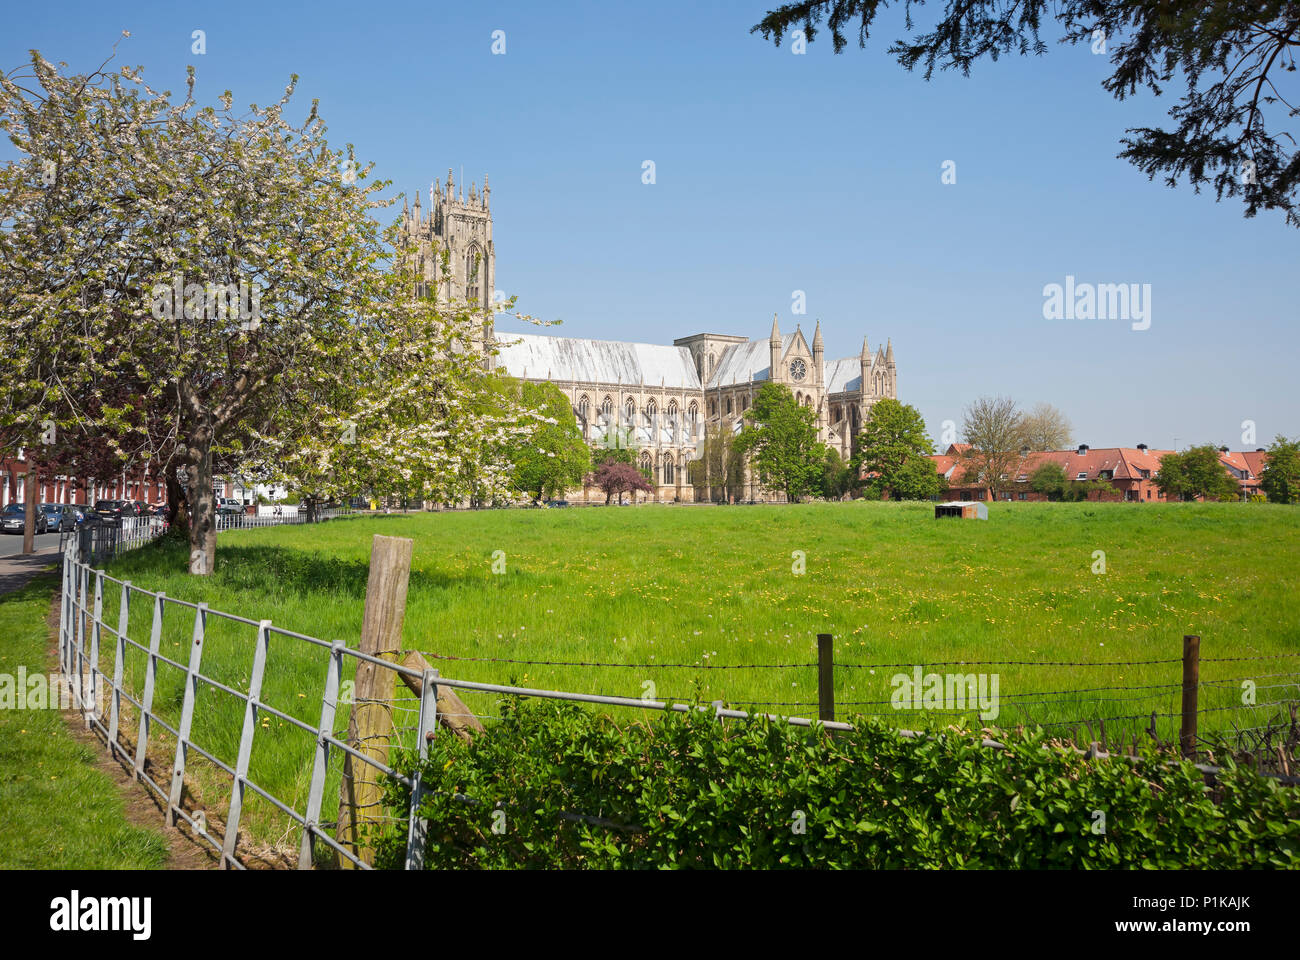 Beverley Minster the Parish Church of St John and St Martin in spring Beverley East Yorkshire England UK United Kingdom GB Great Britain Stock Photo